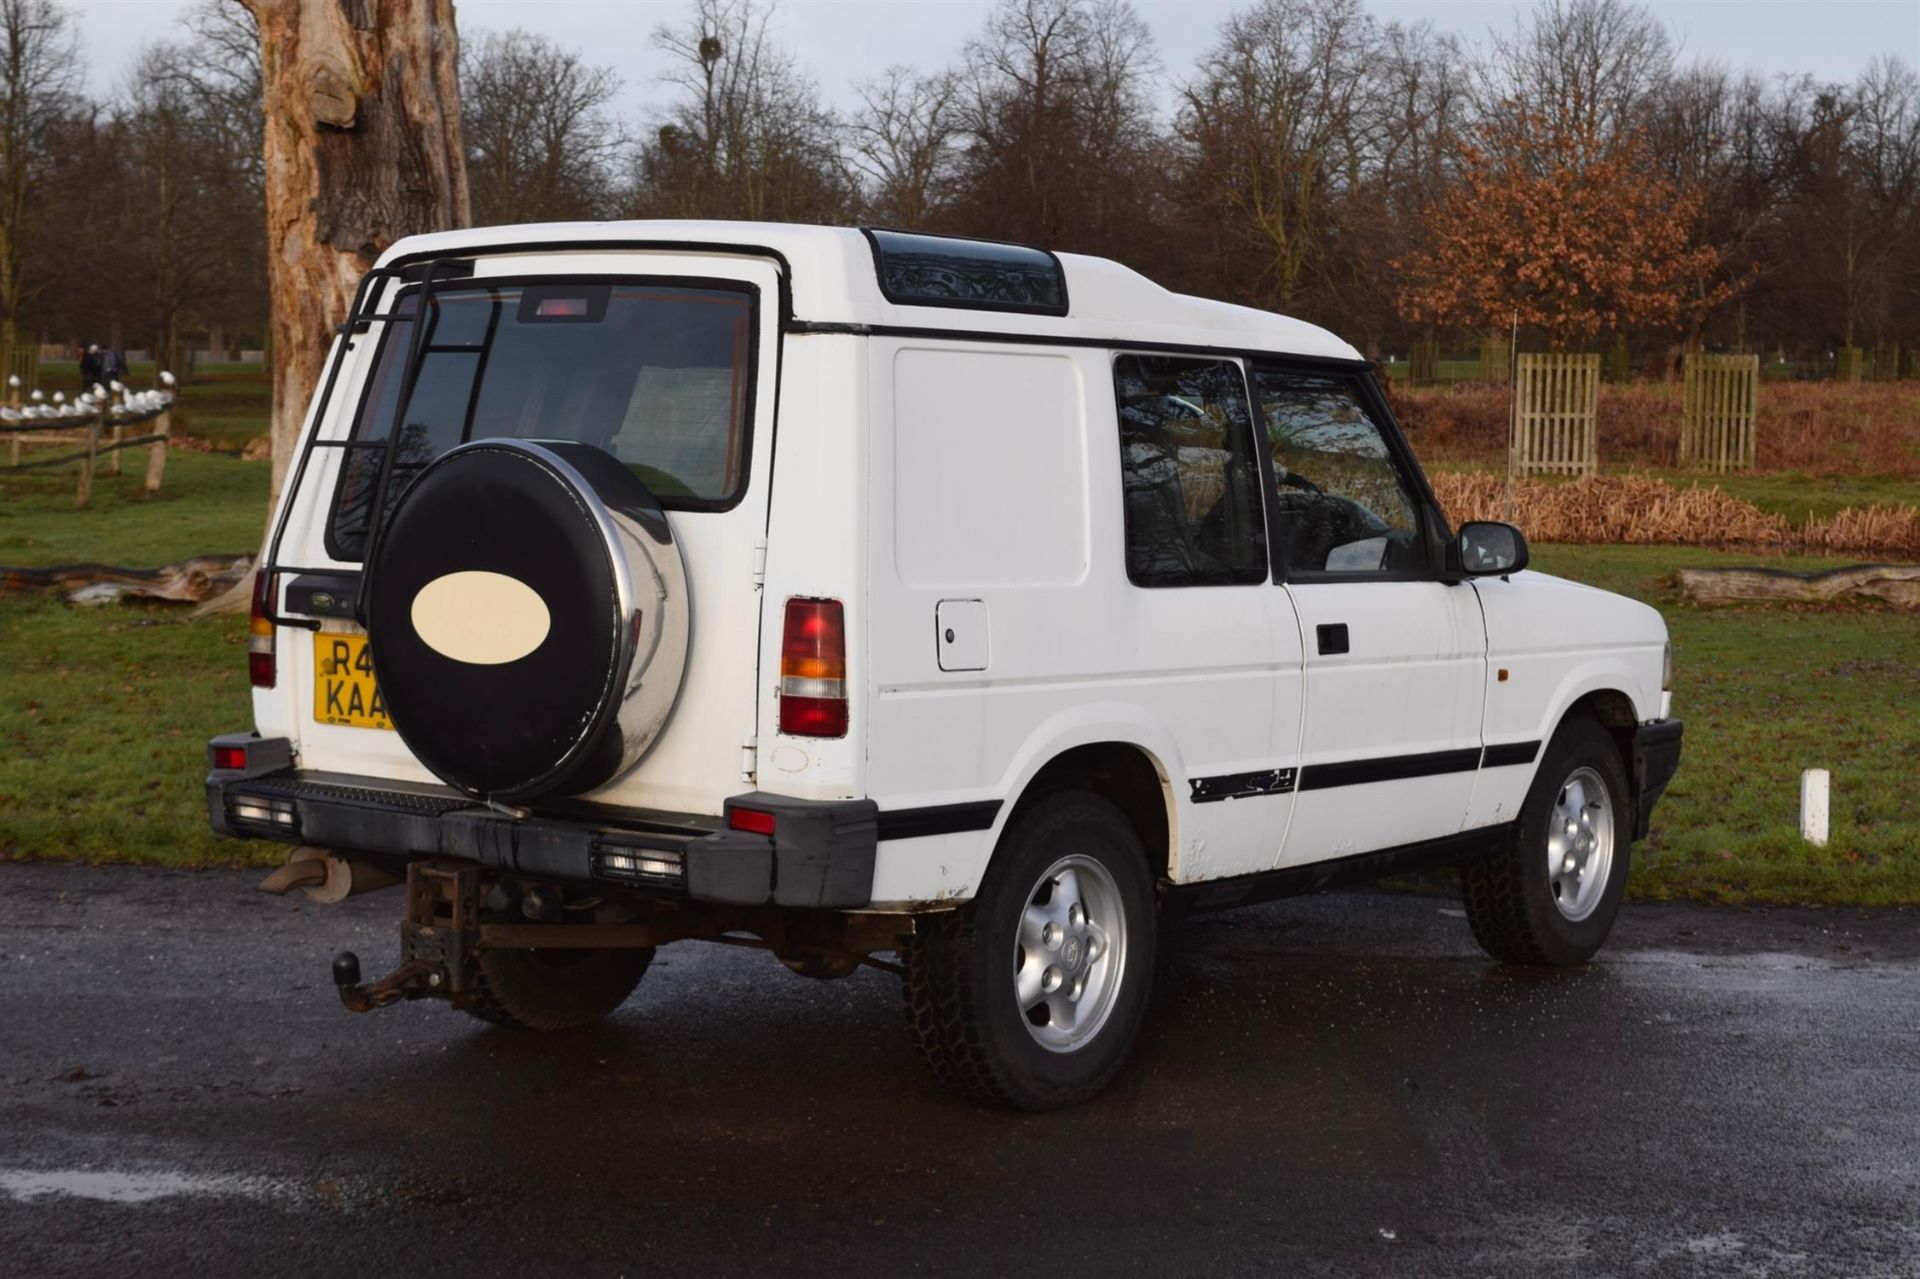 1998 Land Rover Discovery 2-Door R41 KAA. 2-door Land Rover Discovery 300 TDI, which was first - Image 11 of 41